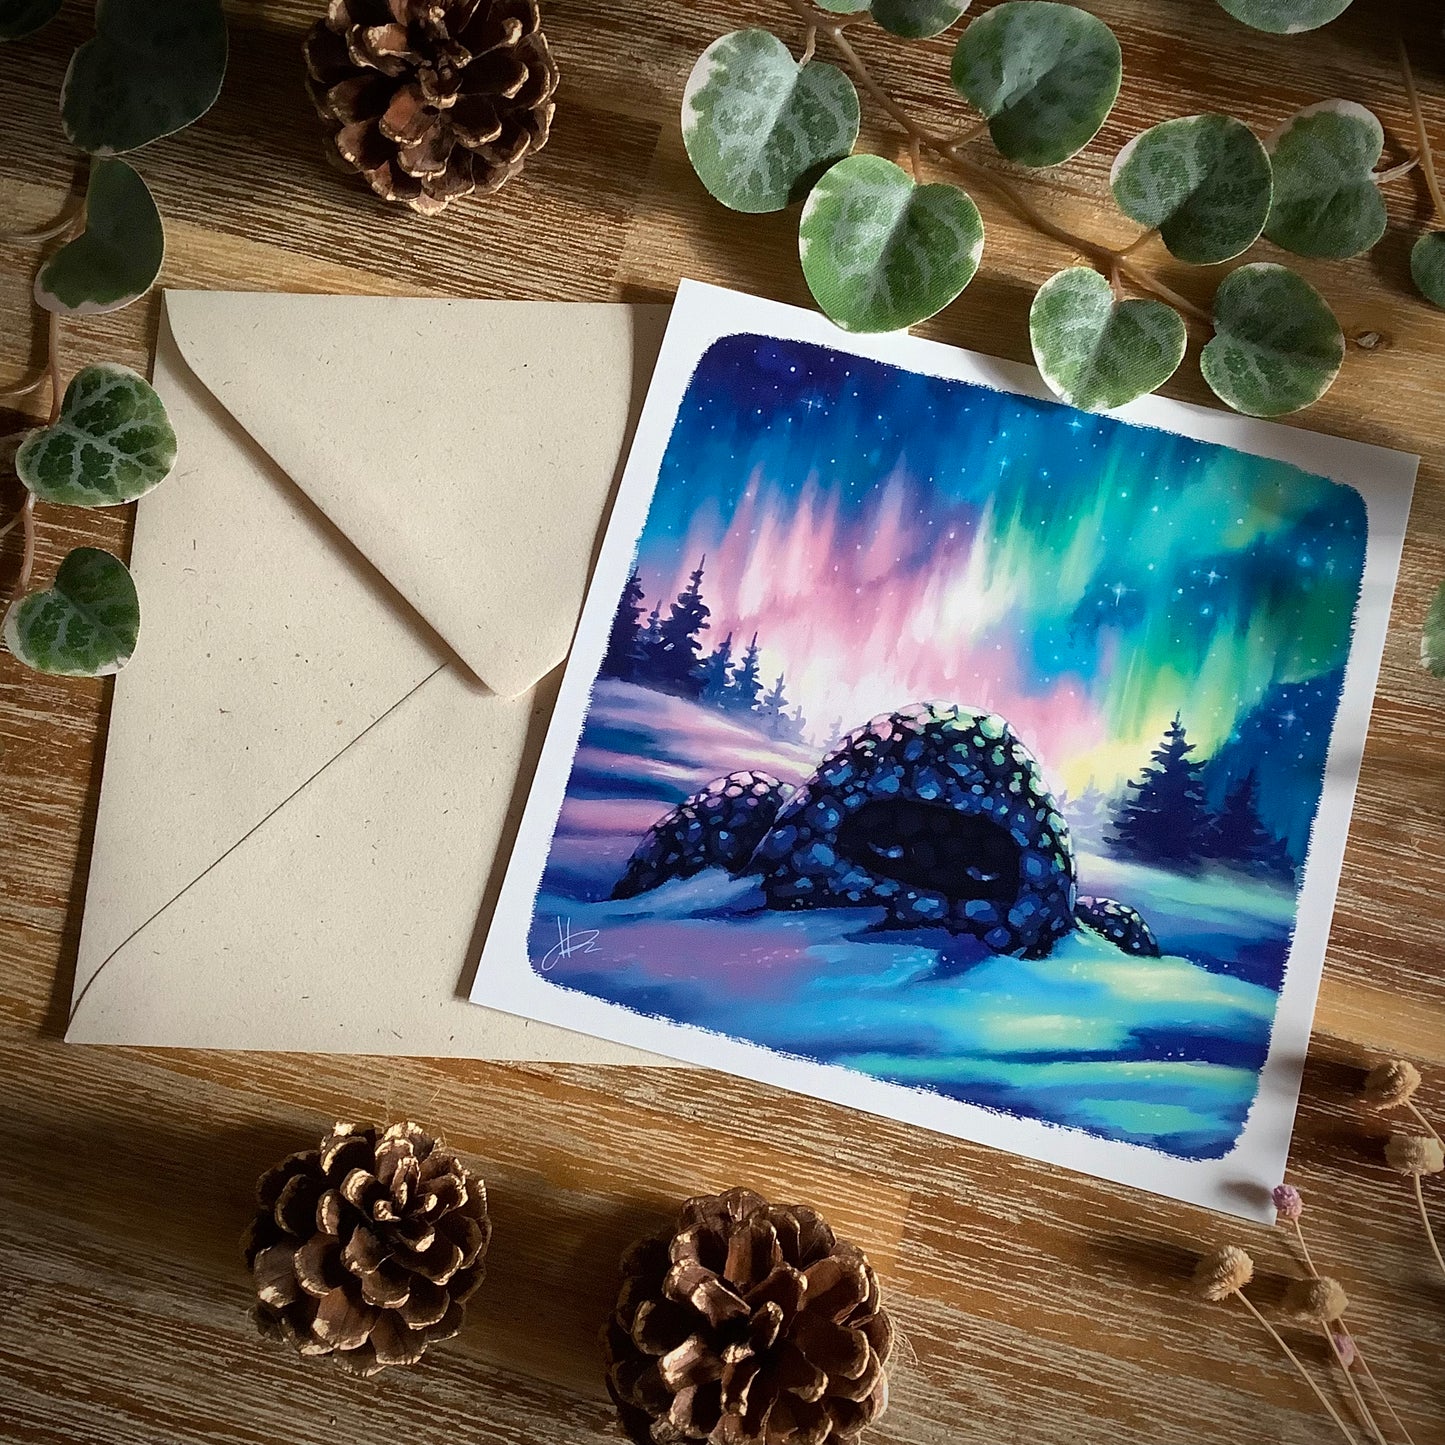 Charming Holiday Cards